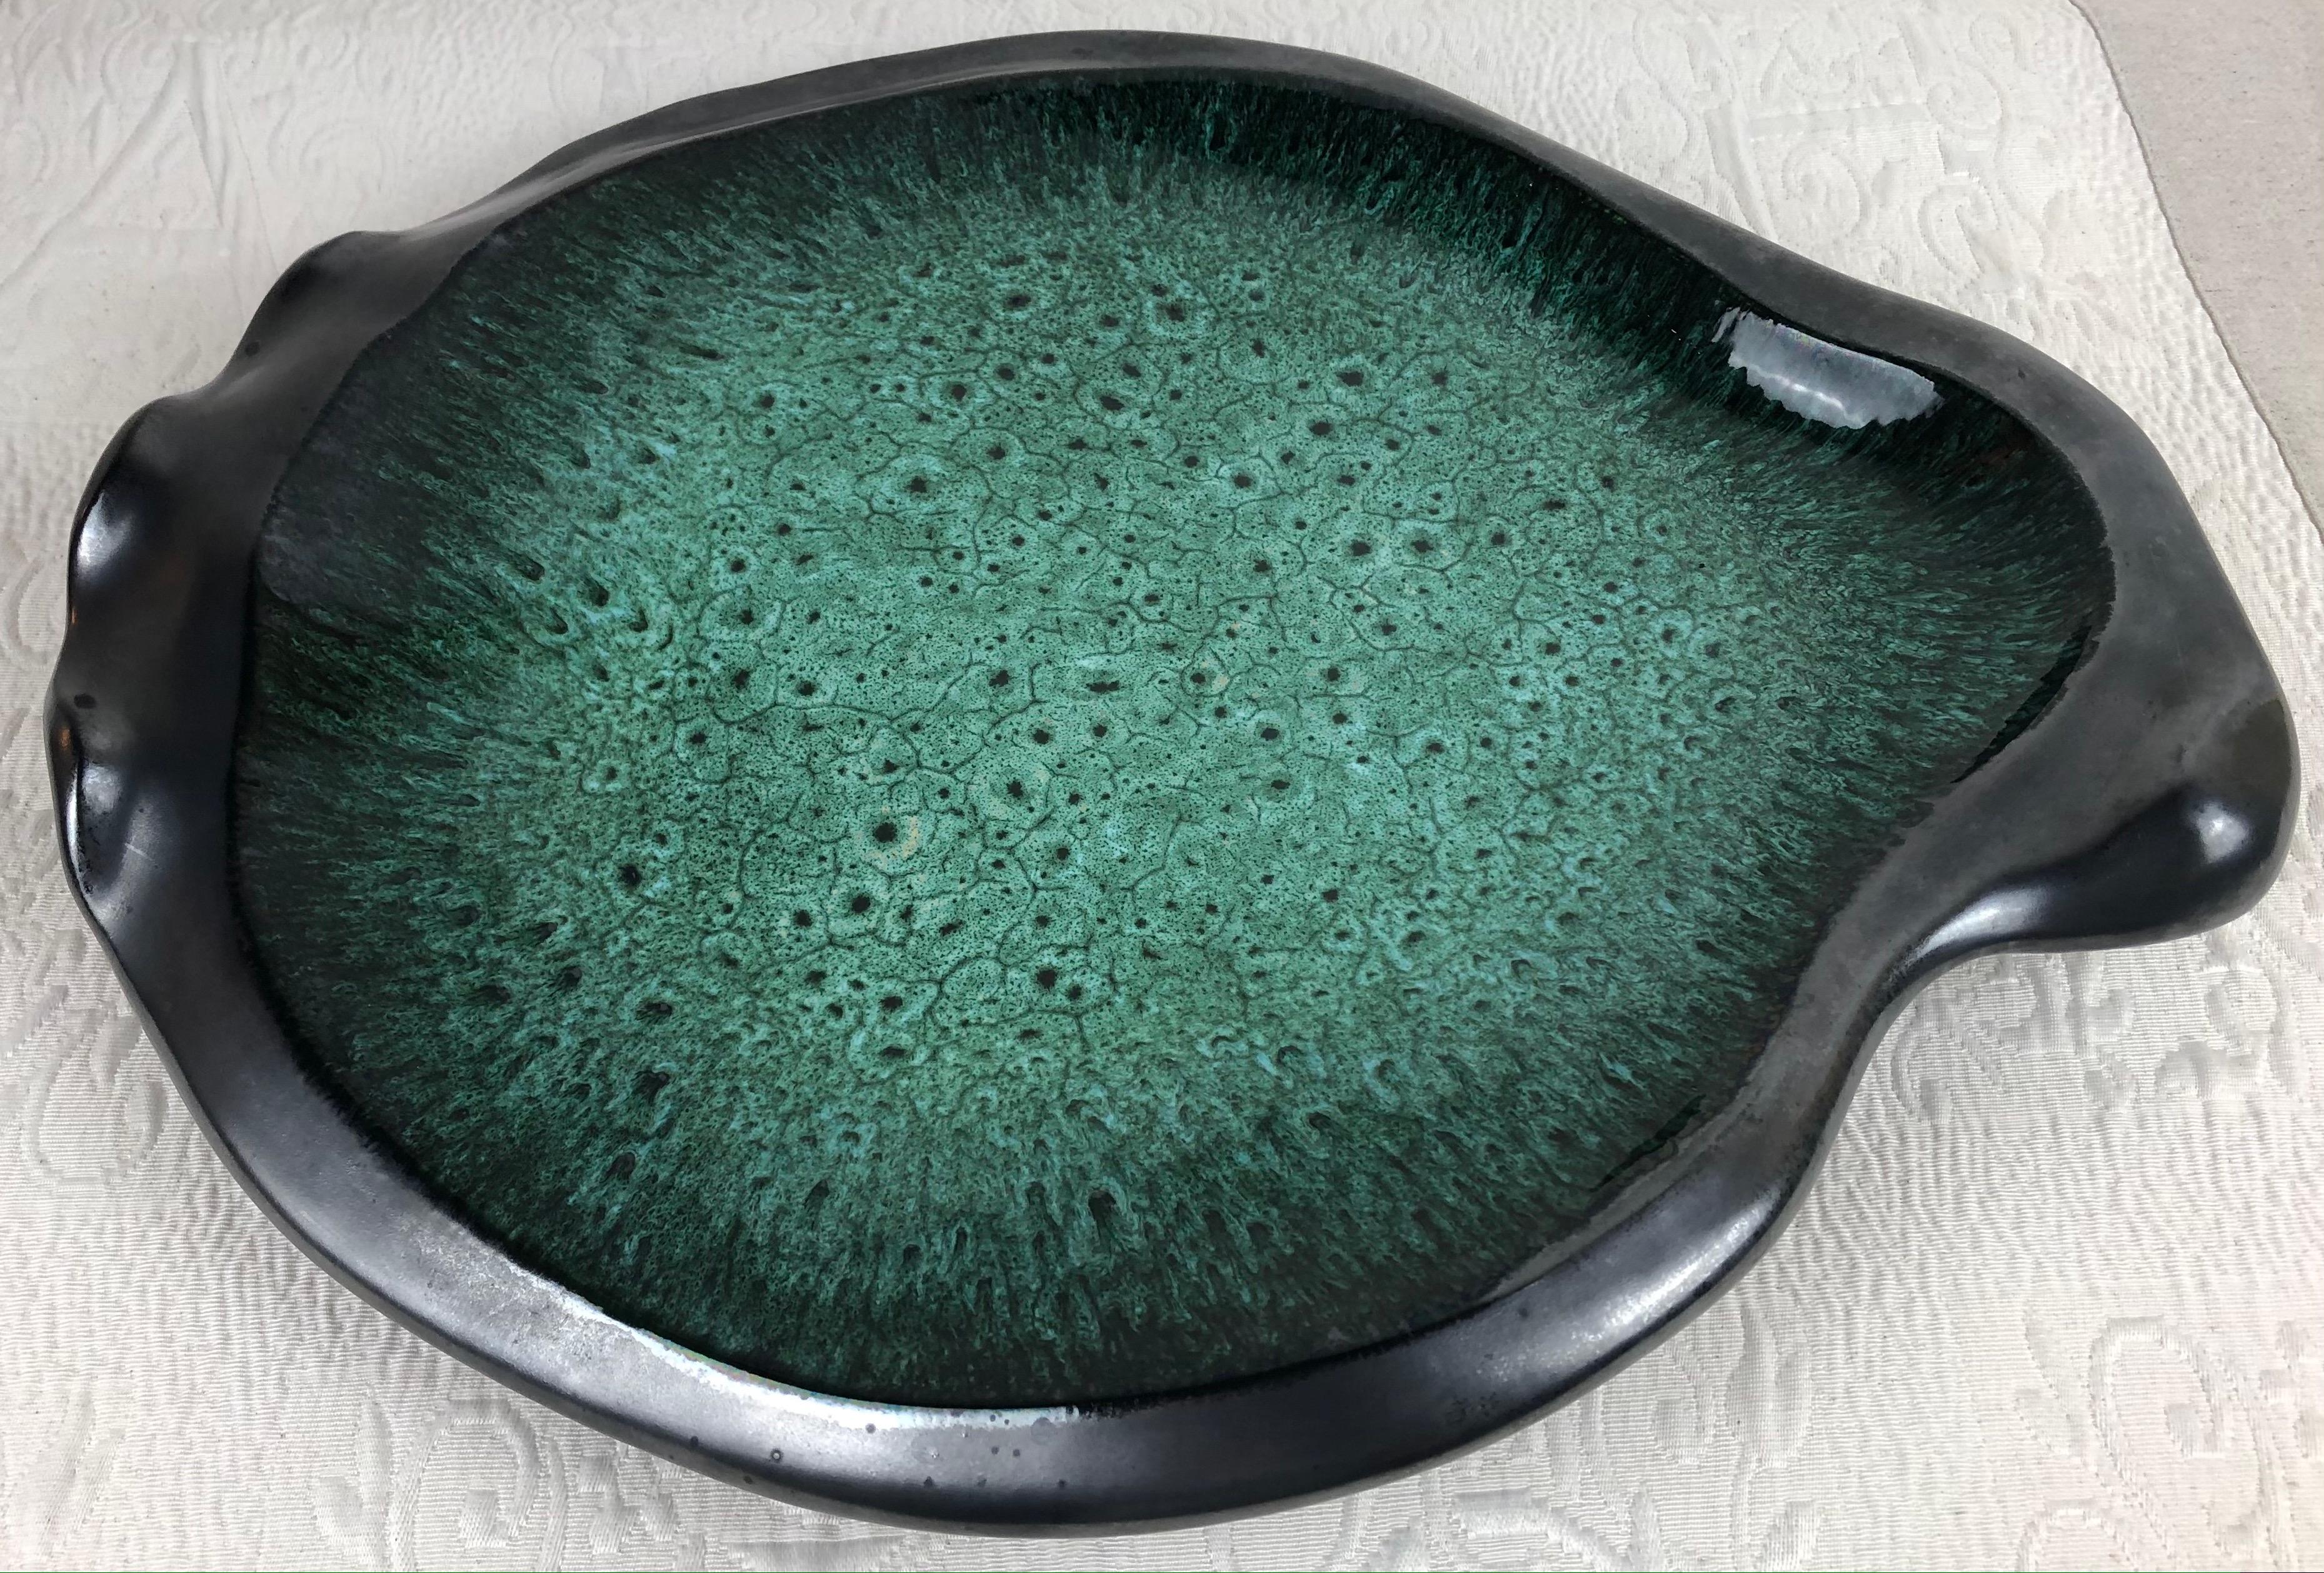 Stunning very large French ceramic bowl or platter, signed.
This mid-century piece features magnificent colors of various shades of glazed green and a black matte finish on the base.

Measures: 19 3/4